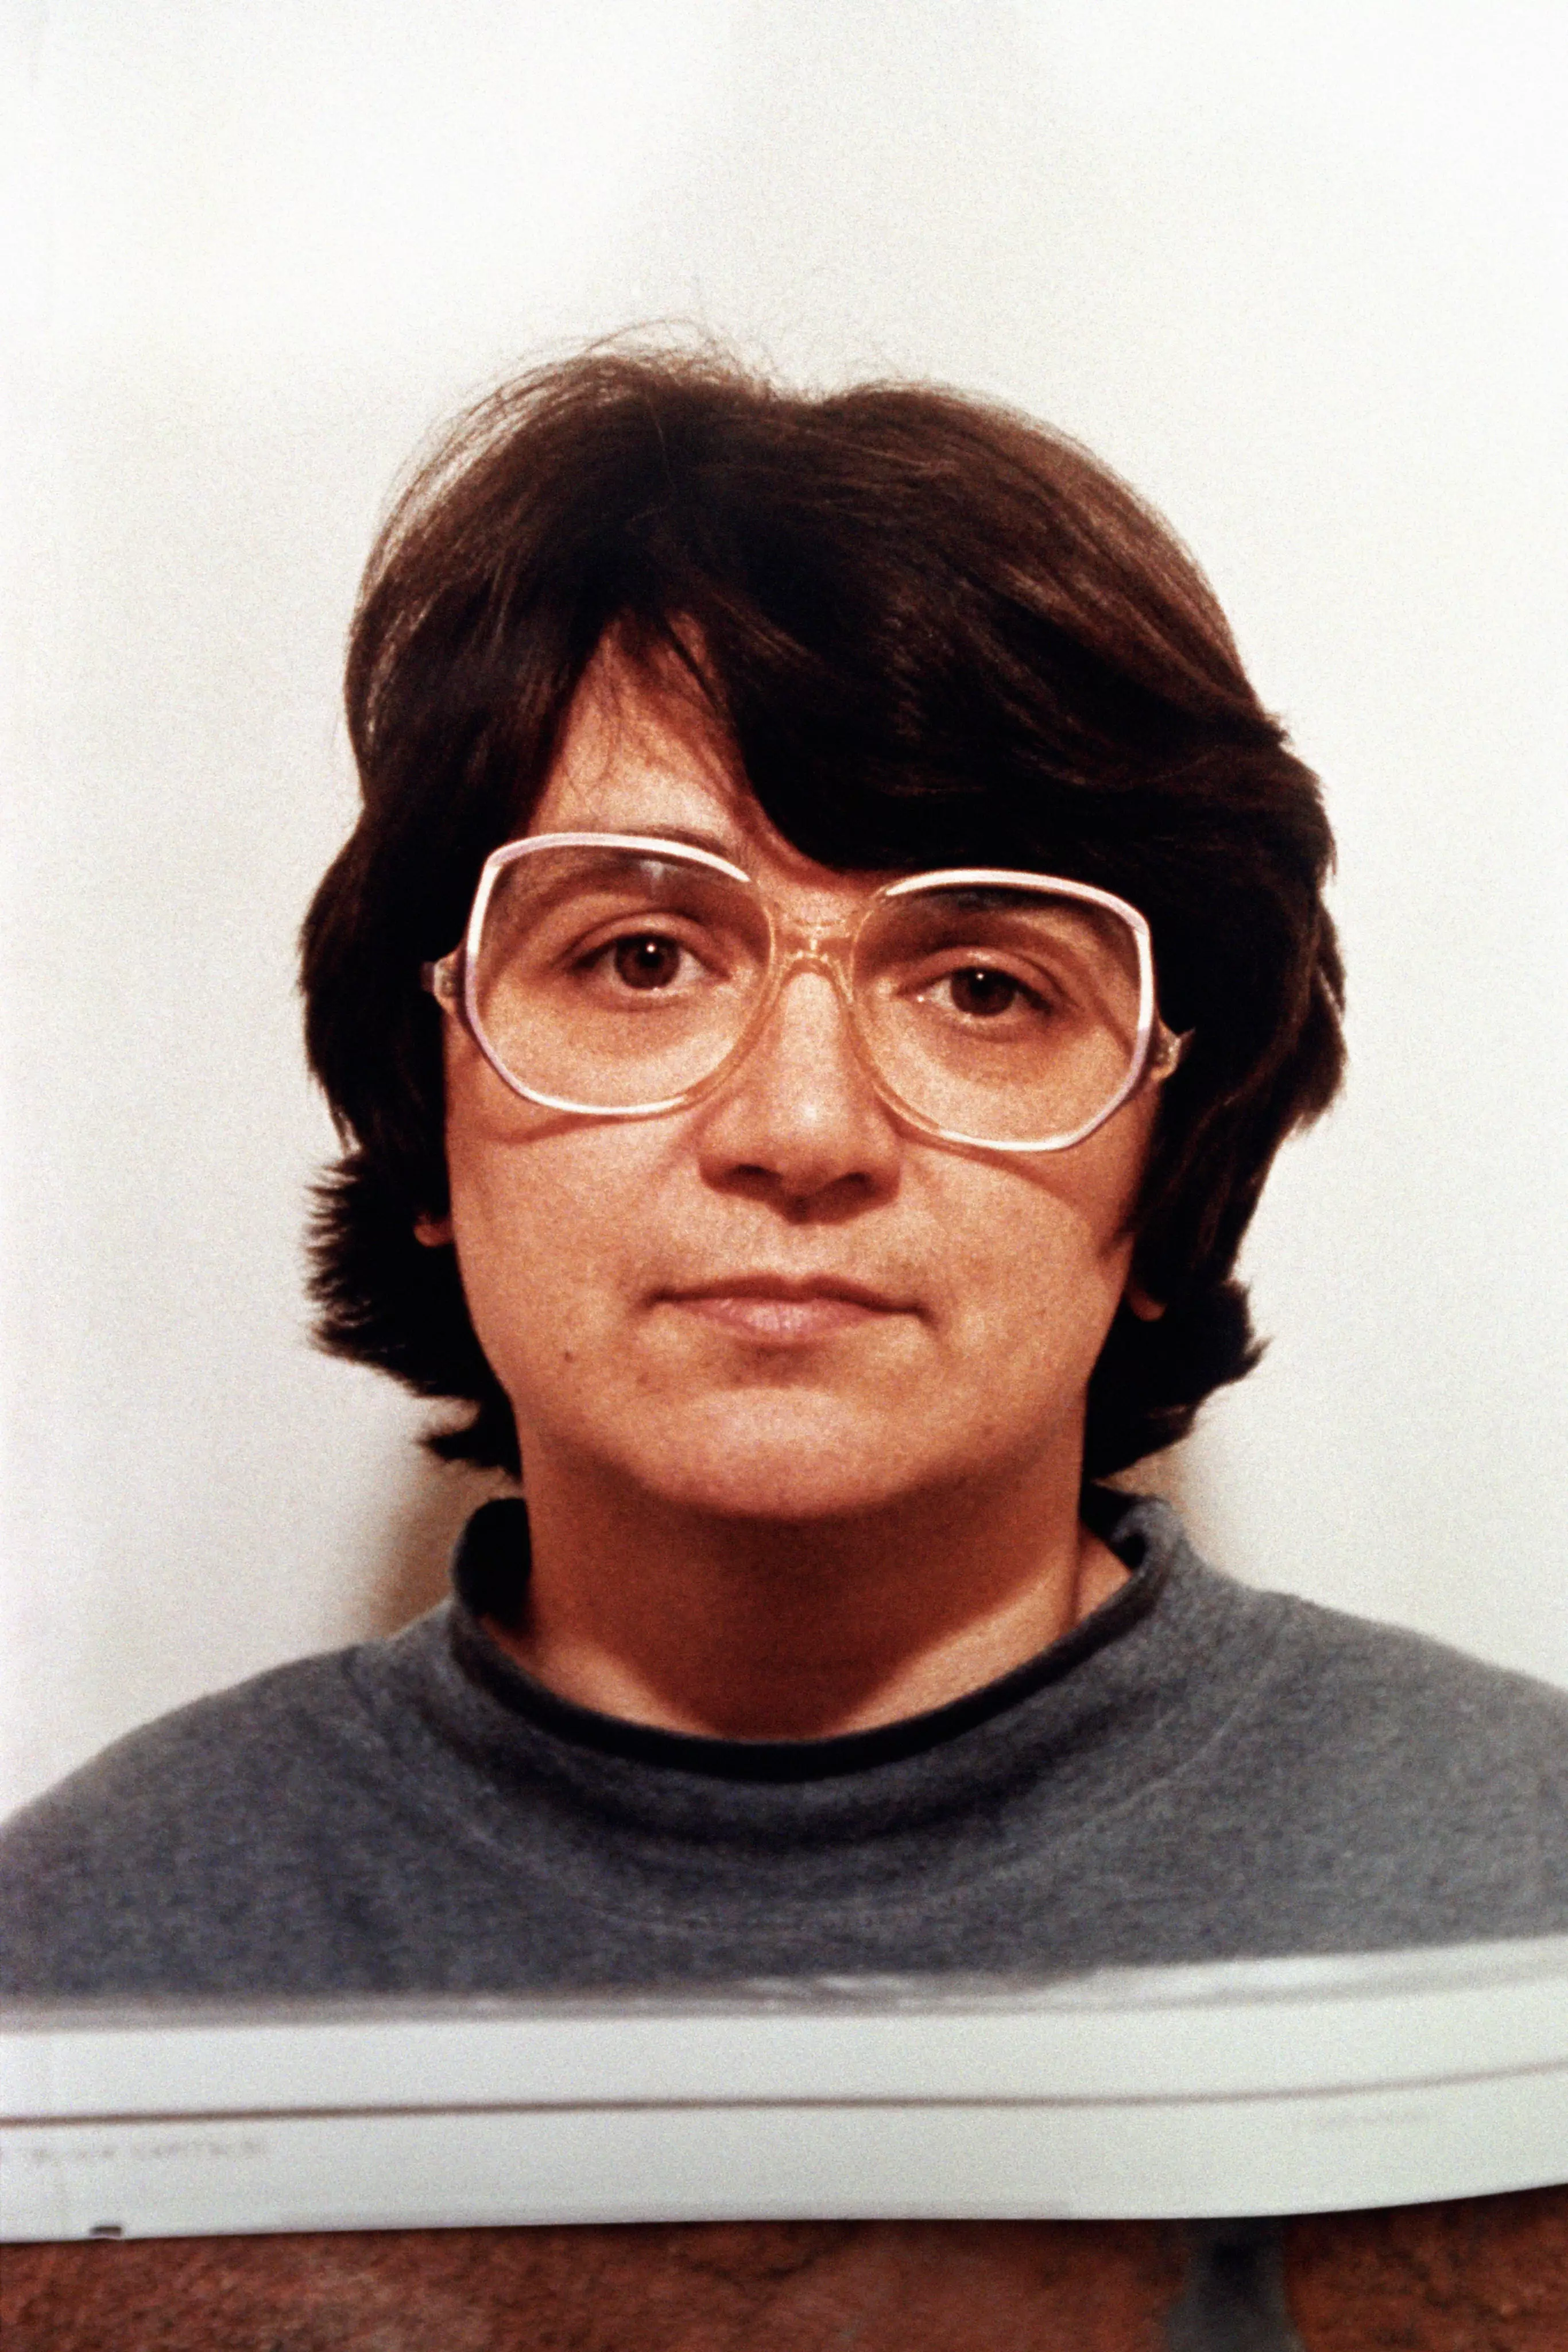 Rose West was convicted of murdering 10 women and sentenced to life in prison.